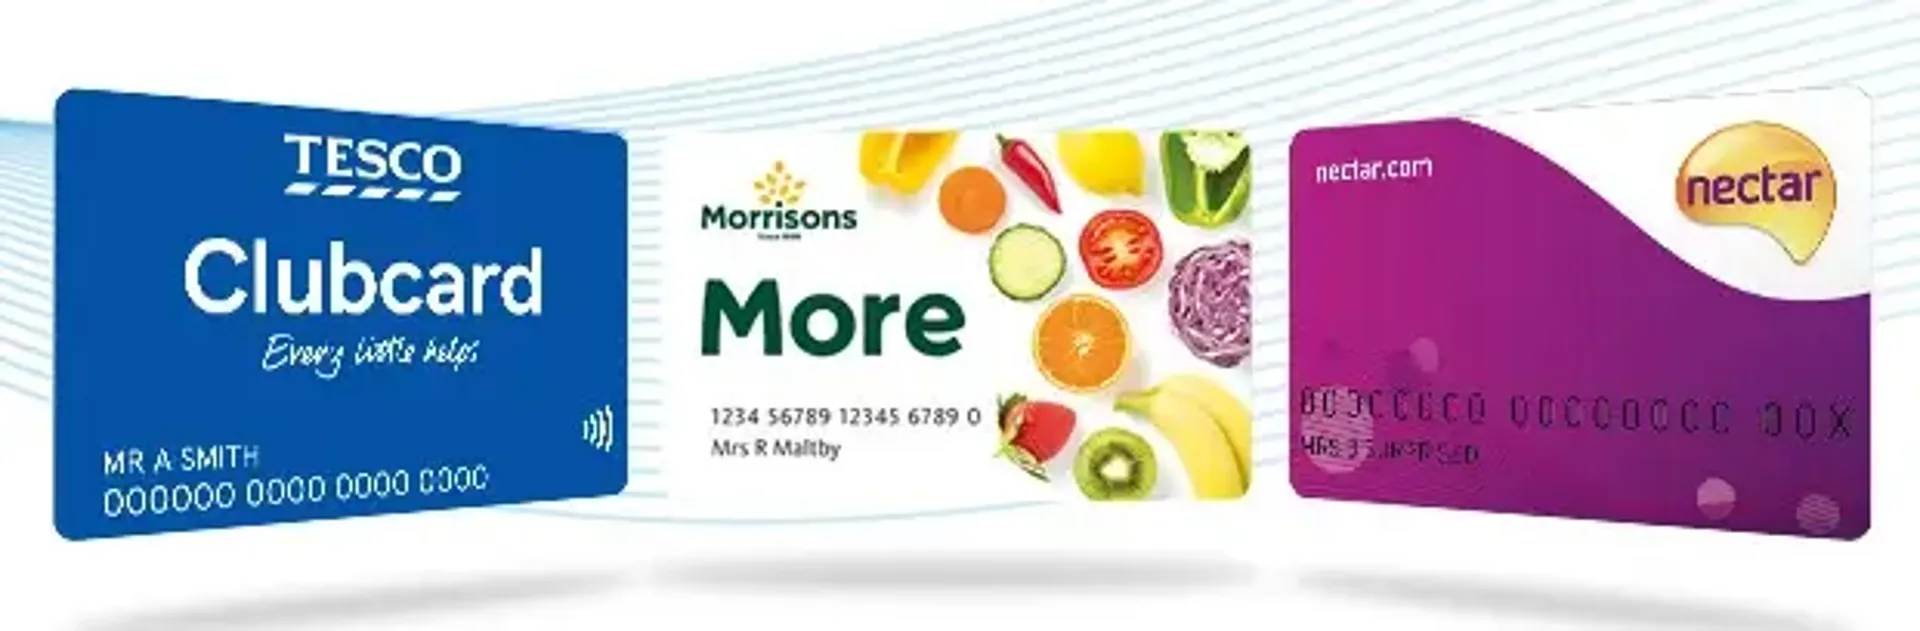 Tesco clubcard, Morrisons more card & a Nectar card for loyalty points and rewards.